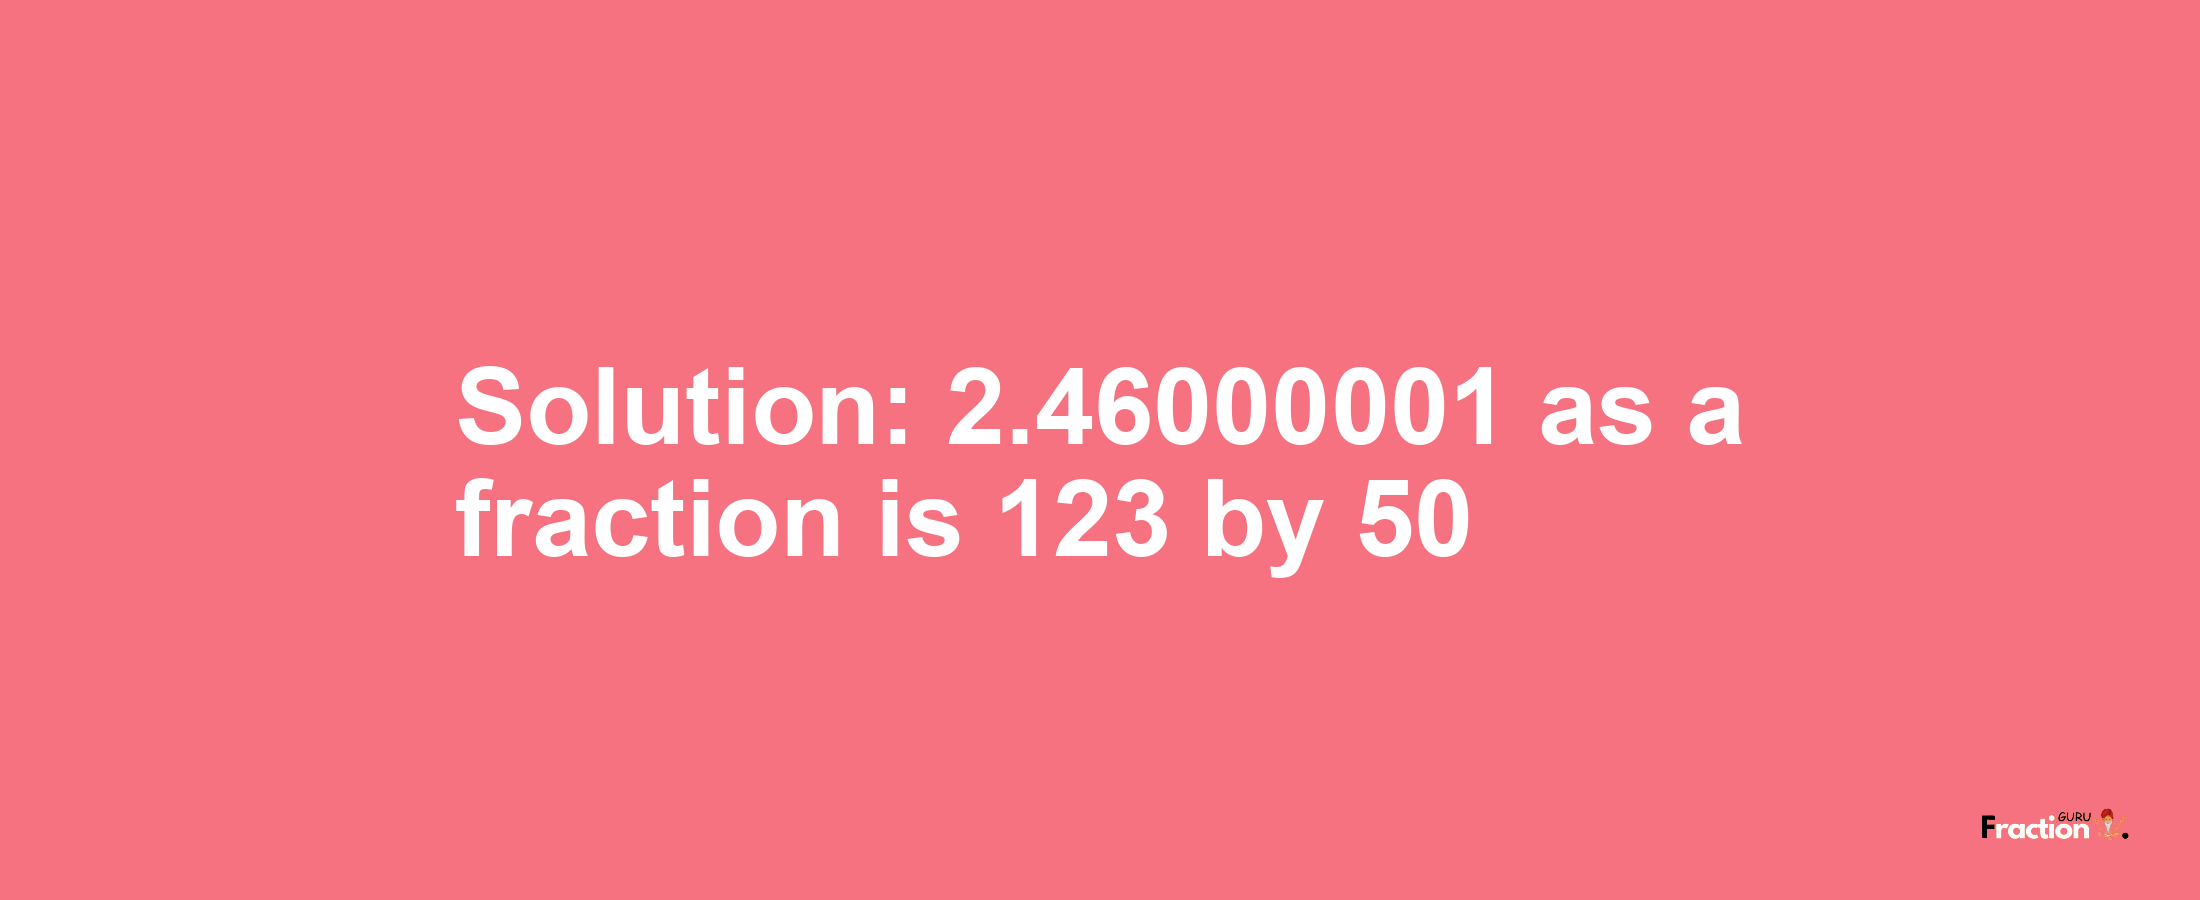 Solution:2.46000001 as a fraction is 123/50